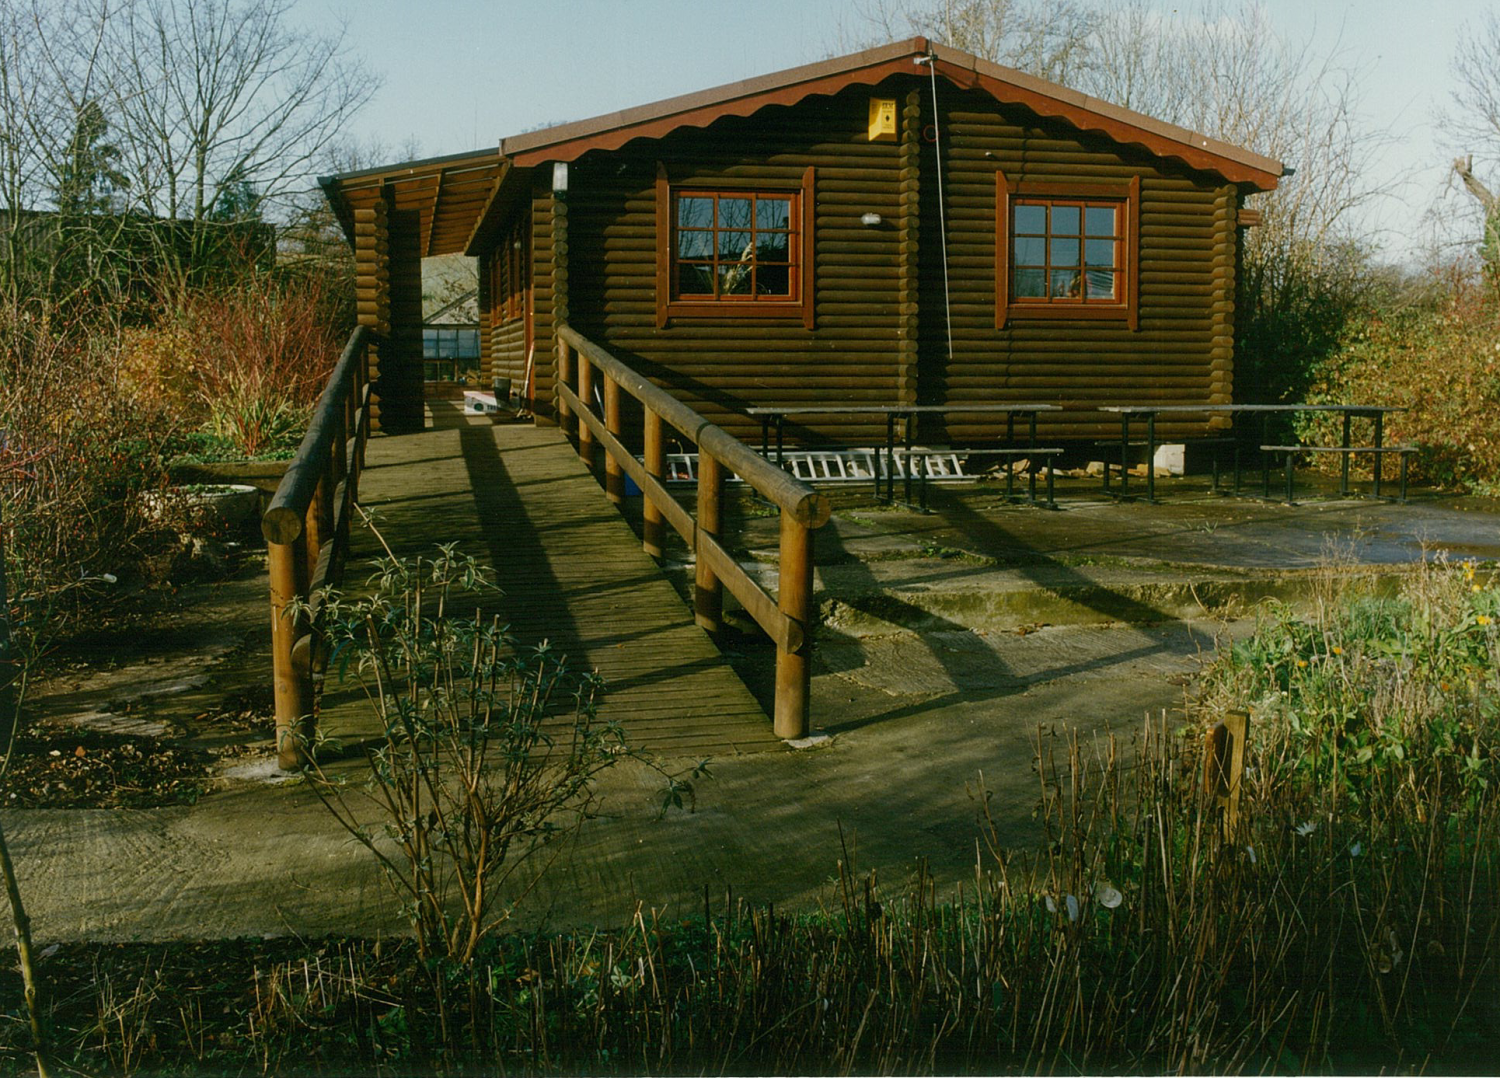 The view of the building before the children's toilet block was added.